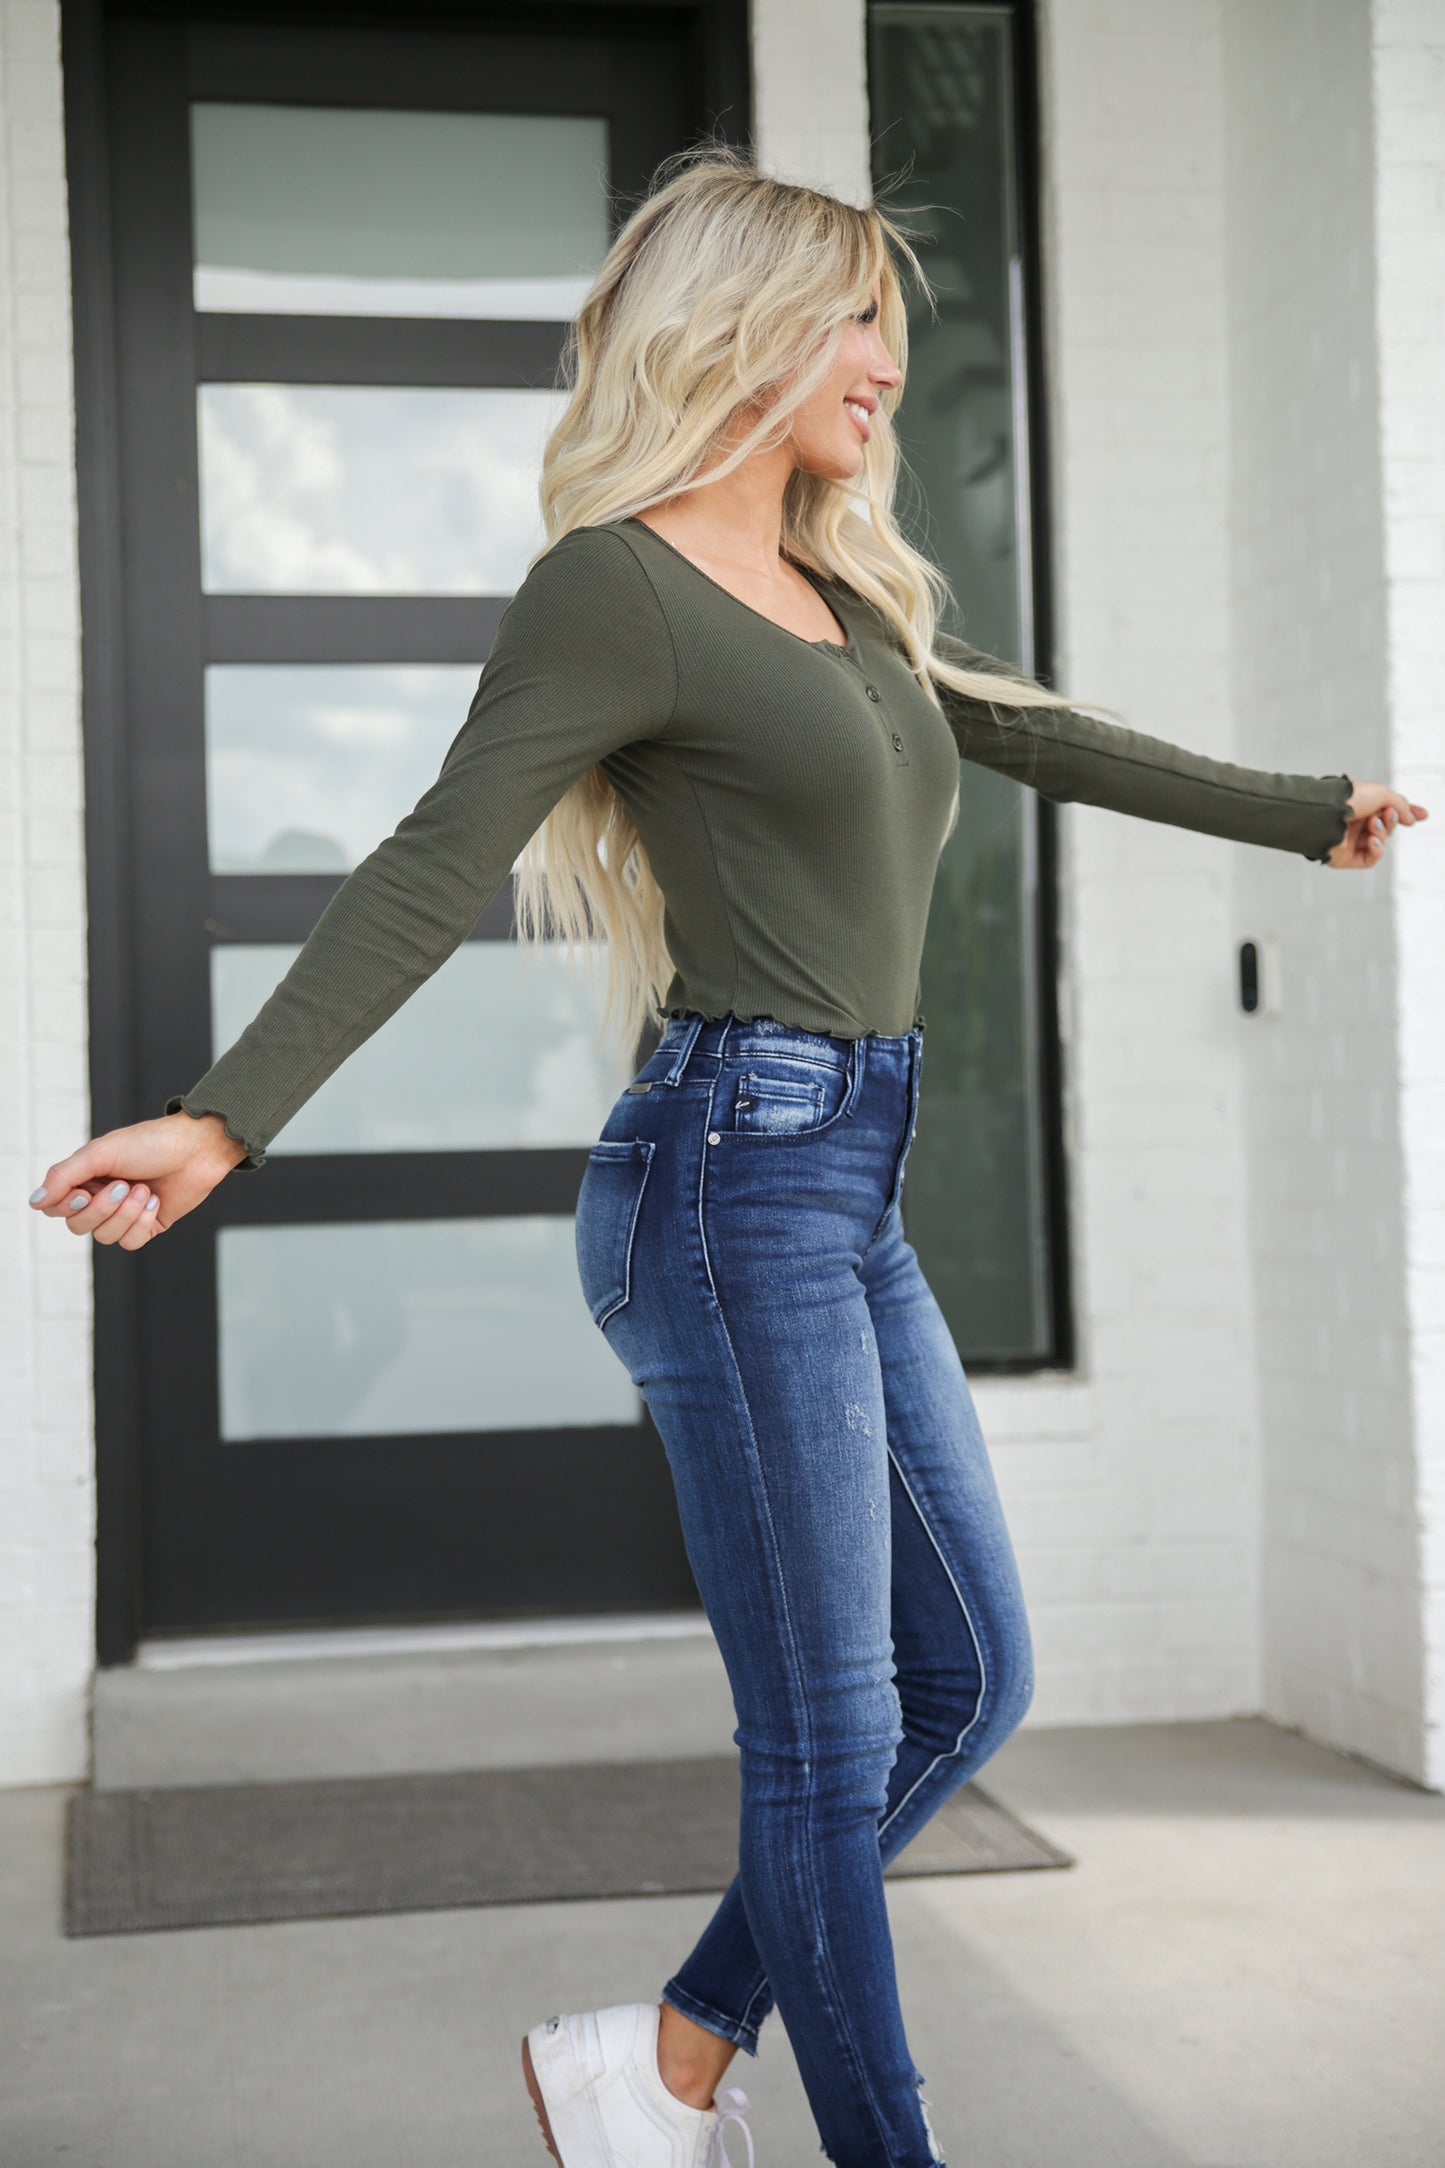 Ribbed Henley Long Sleeve Top